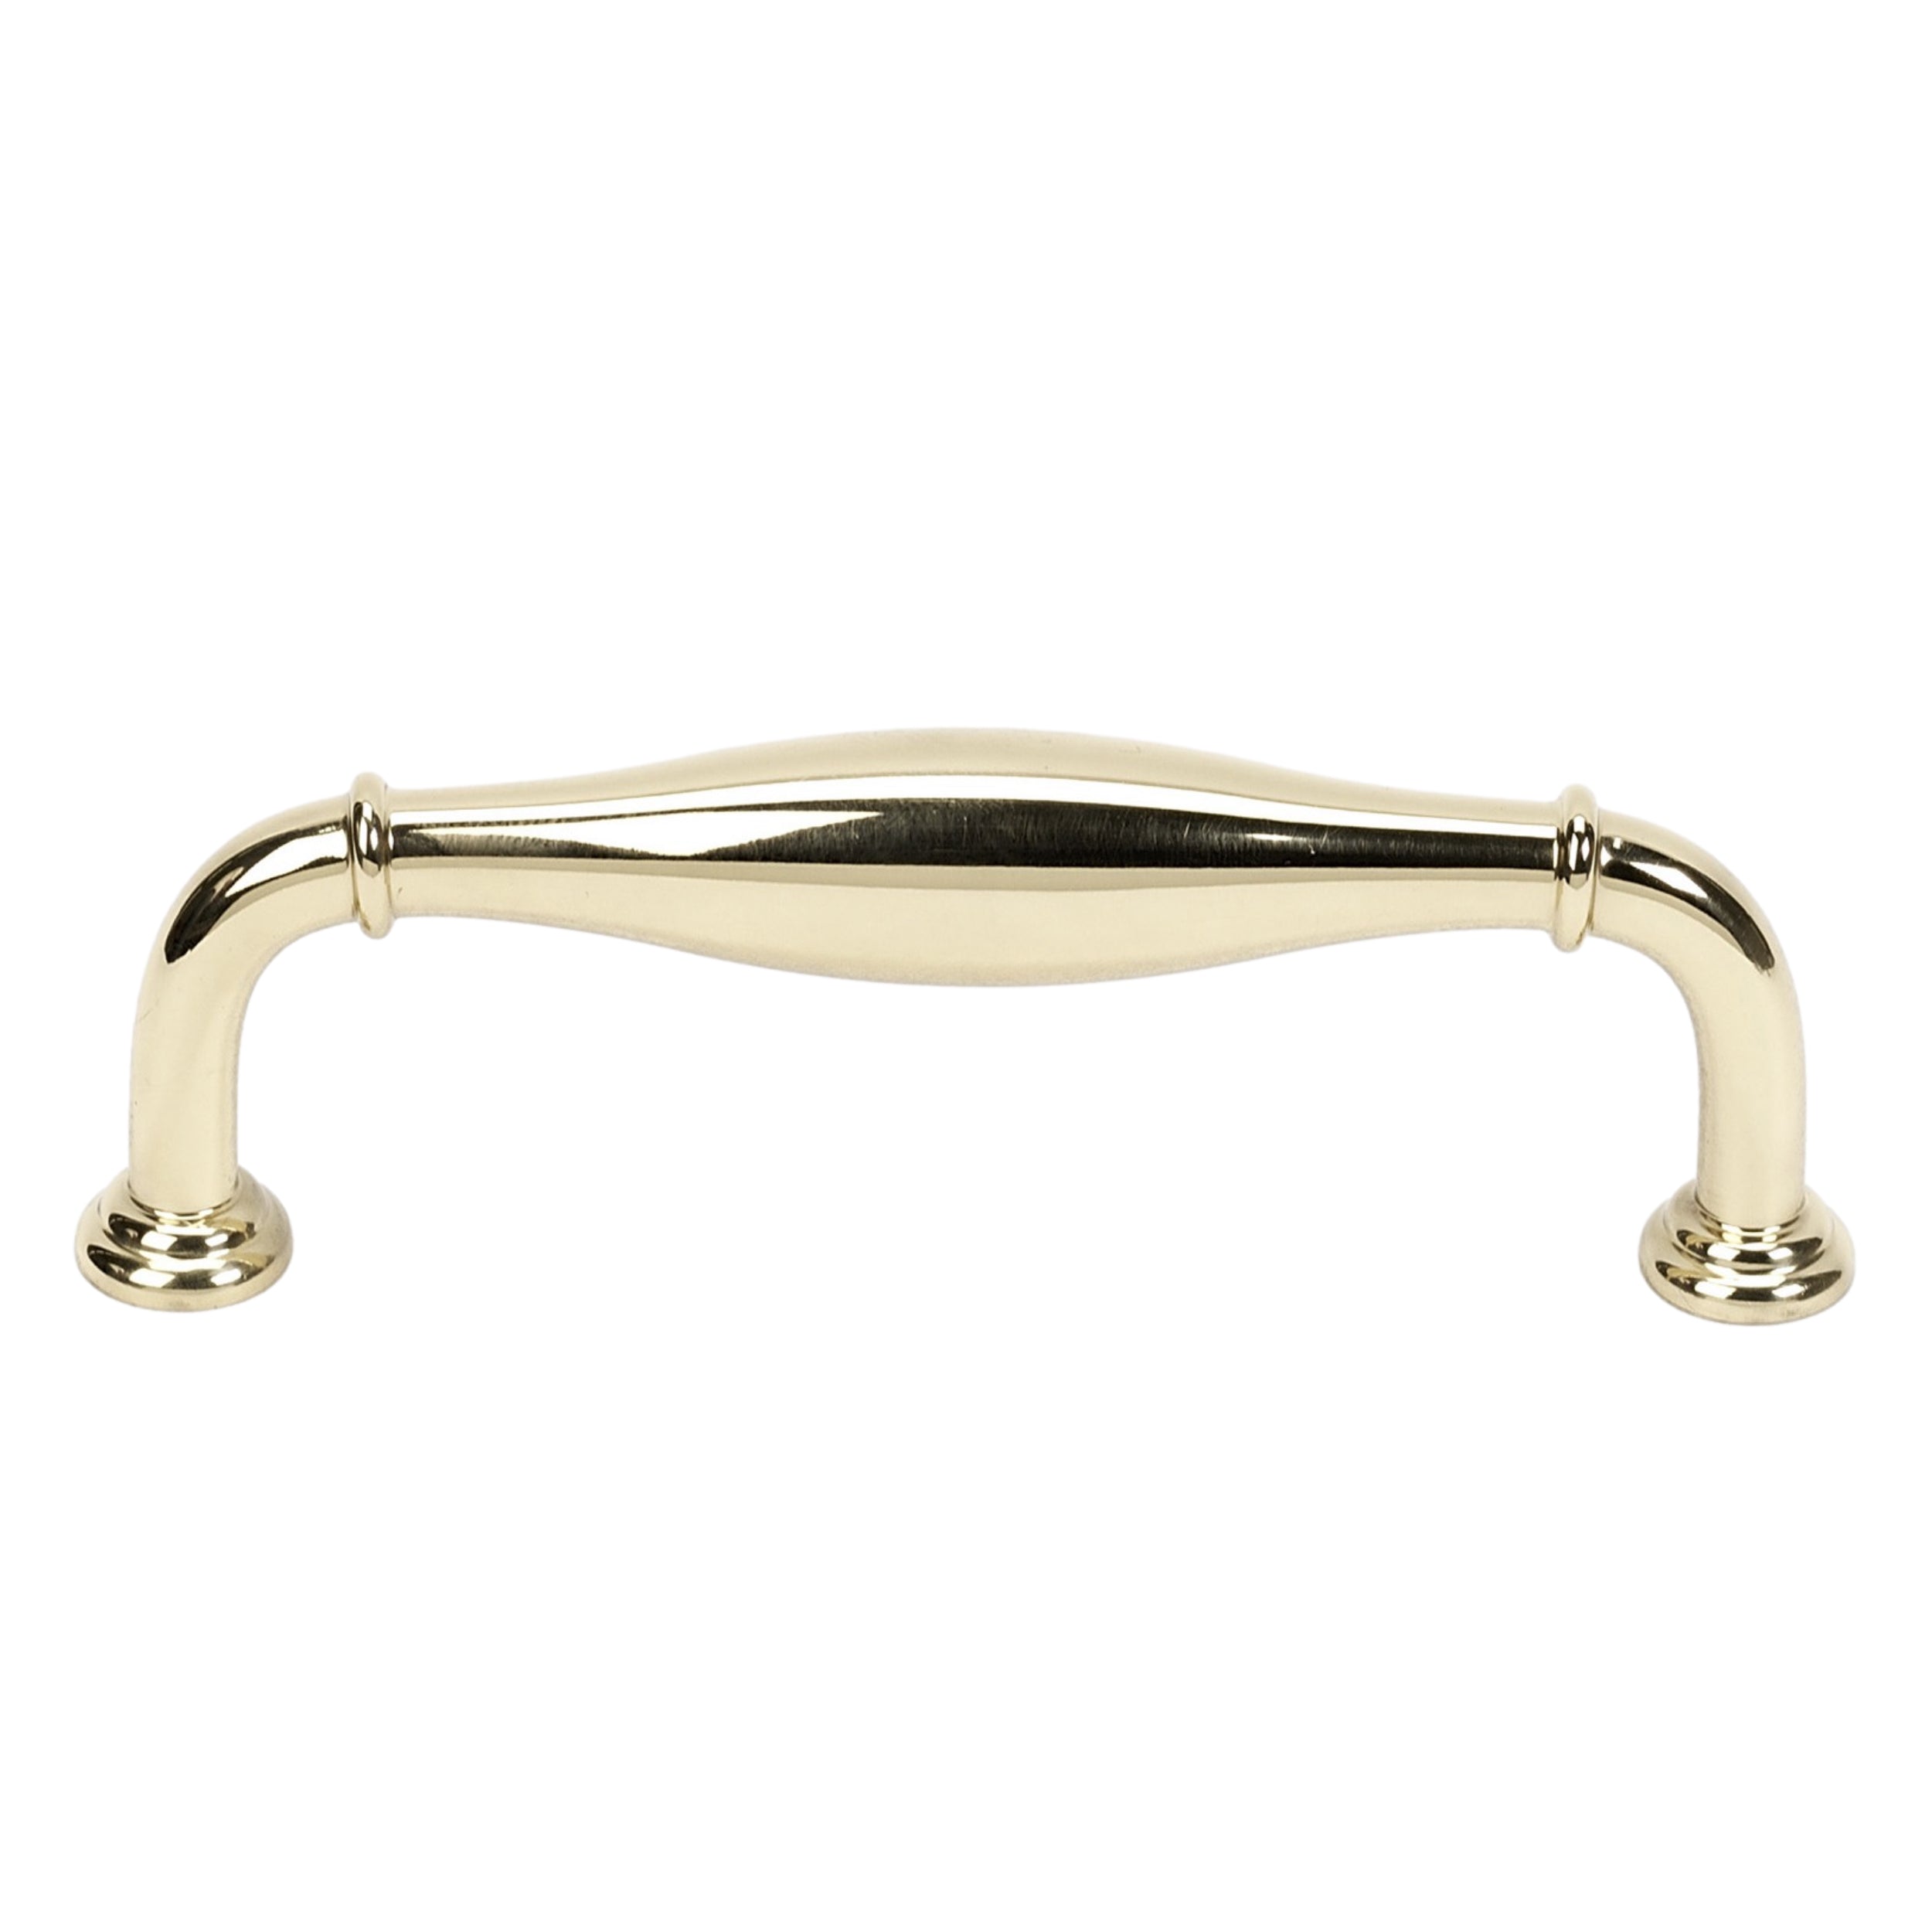 Unlacquered Brass "Perry" Cabinet Knobs and Drawer Pulls